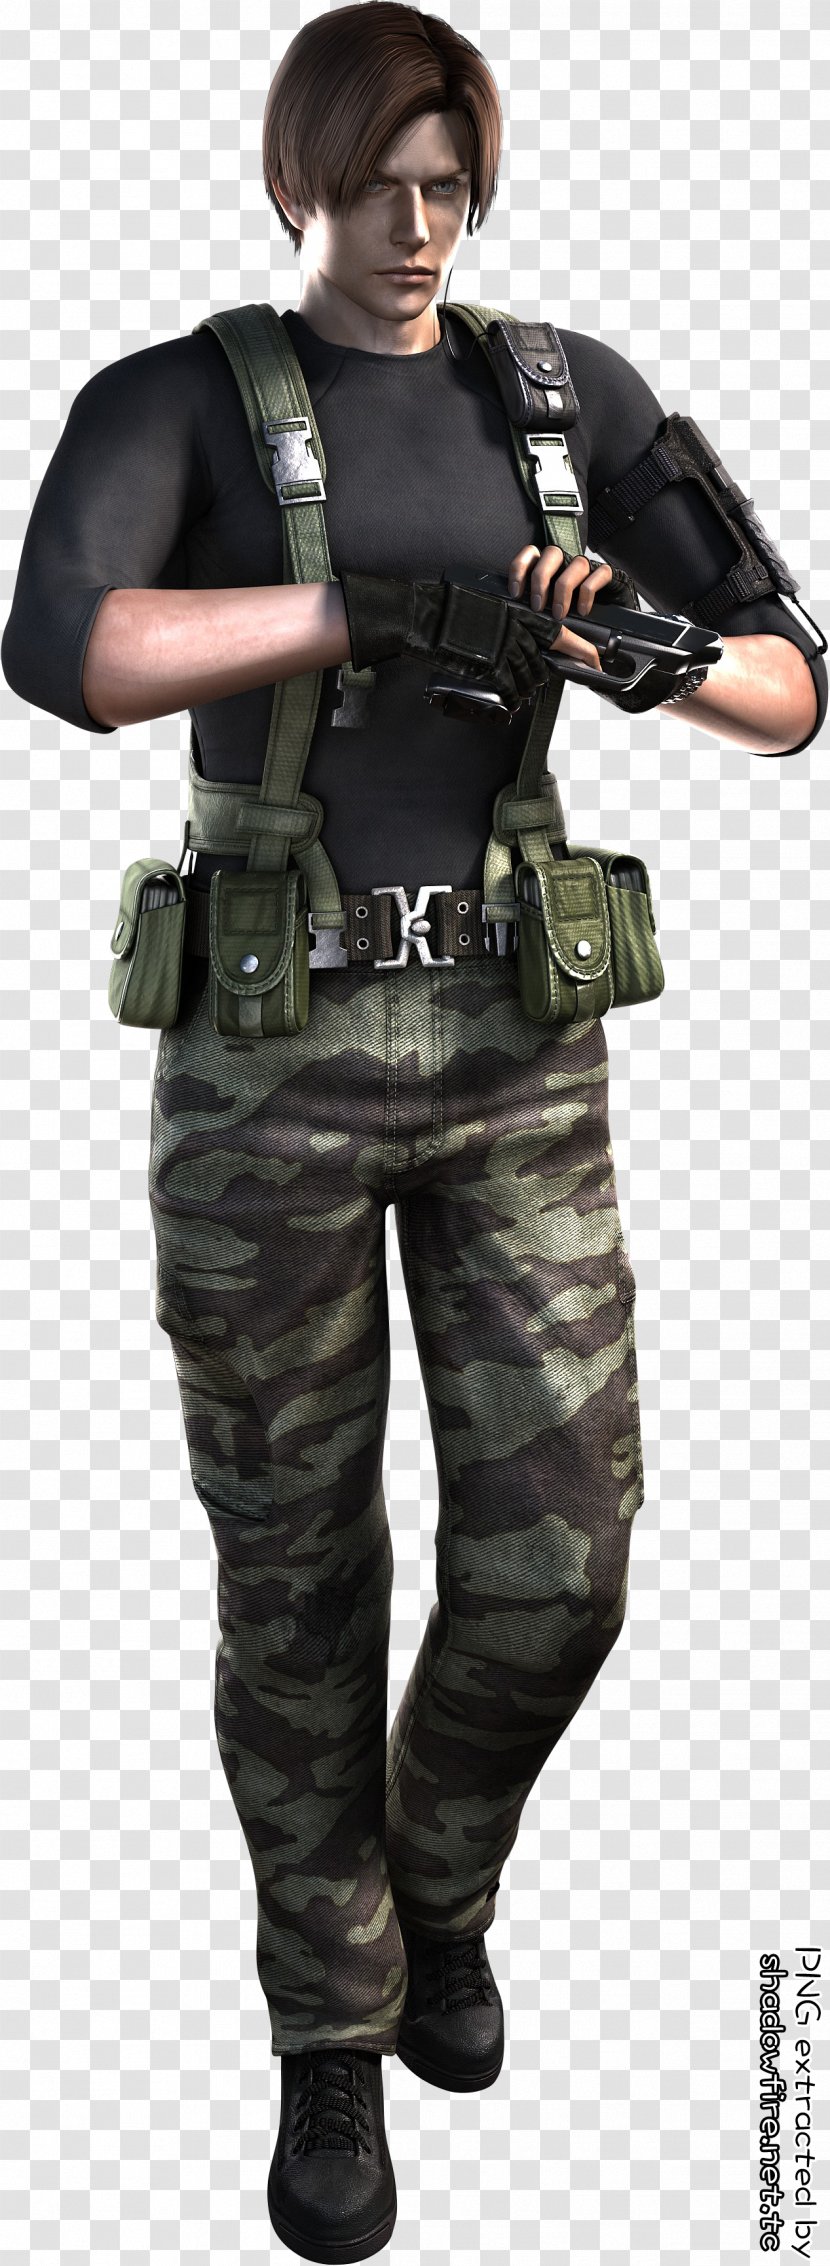 Resident Evil: The Darkside Chronicles Evil 6 4 2 Operation Raccoon City - Military Person Transparent PNG